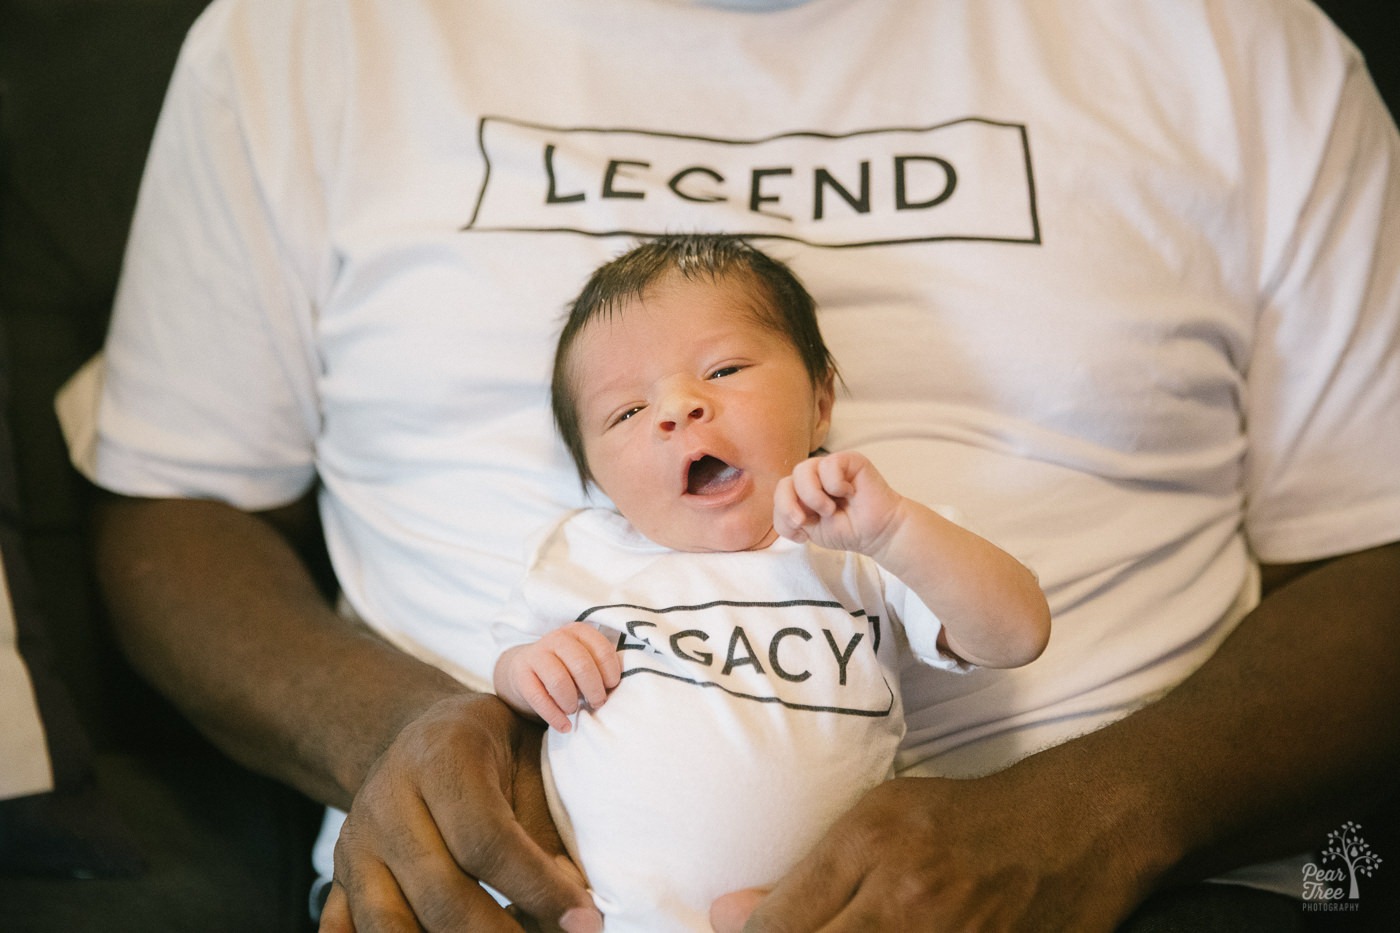 Dad in LEGEND t-shirt holding his five day old son wearing a LEGACY onesie during their legacy lifestyle newborn session.